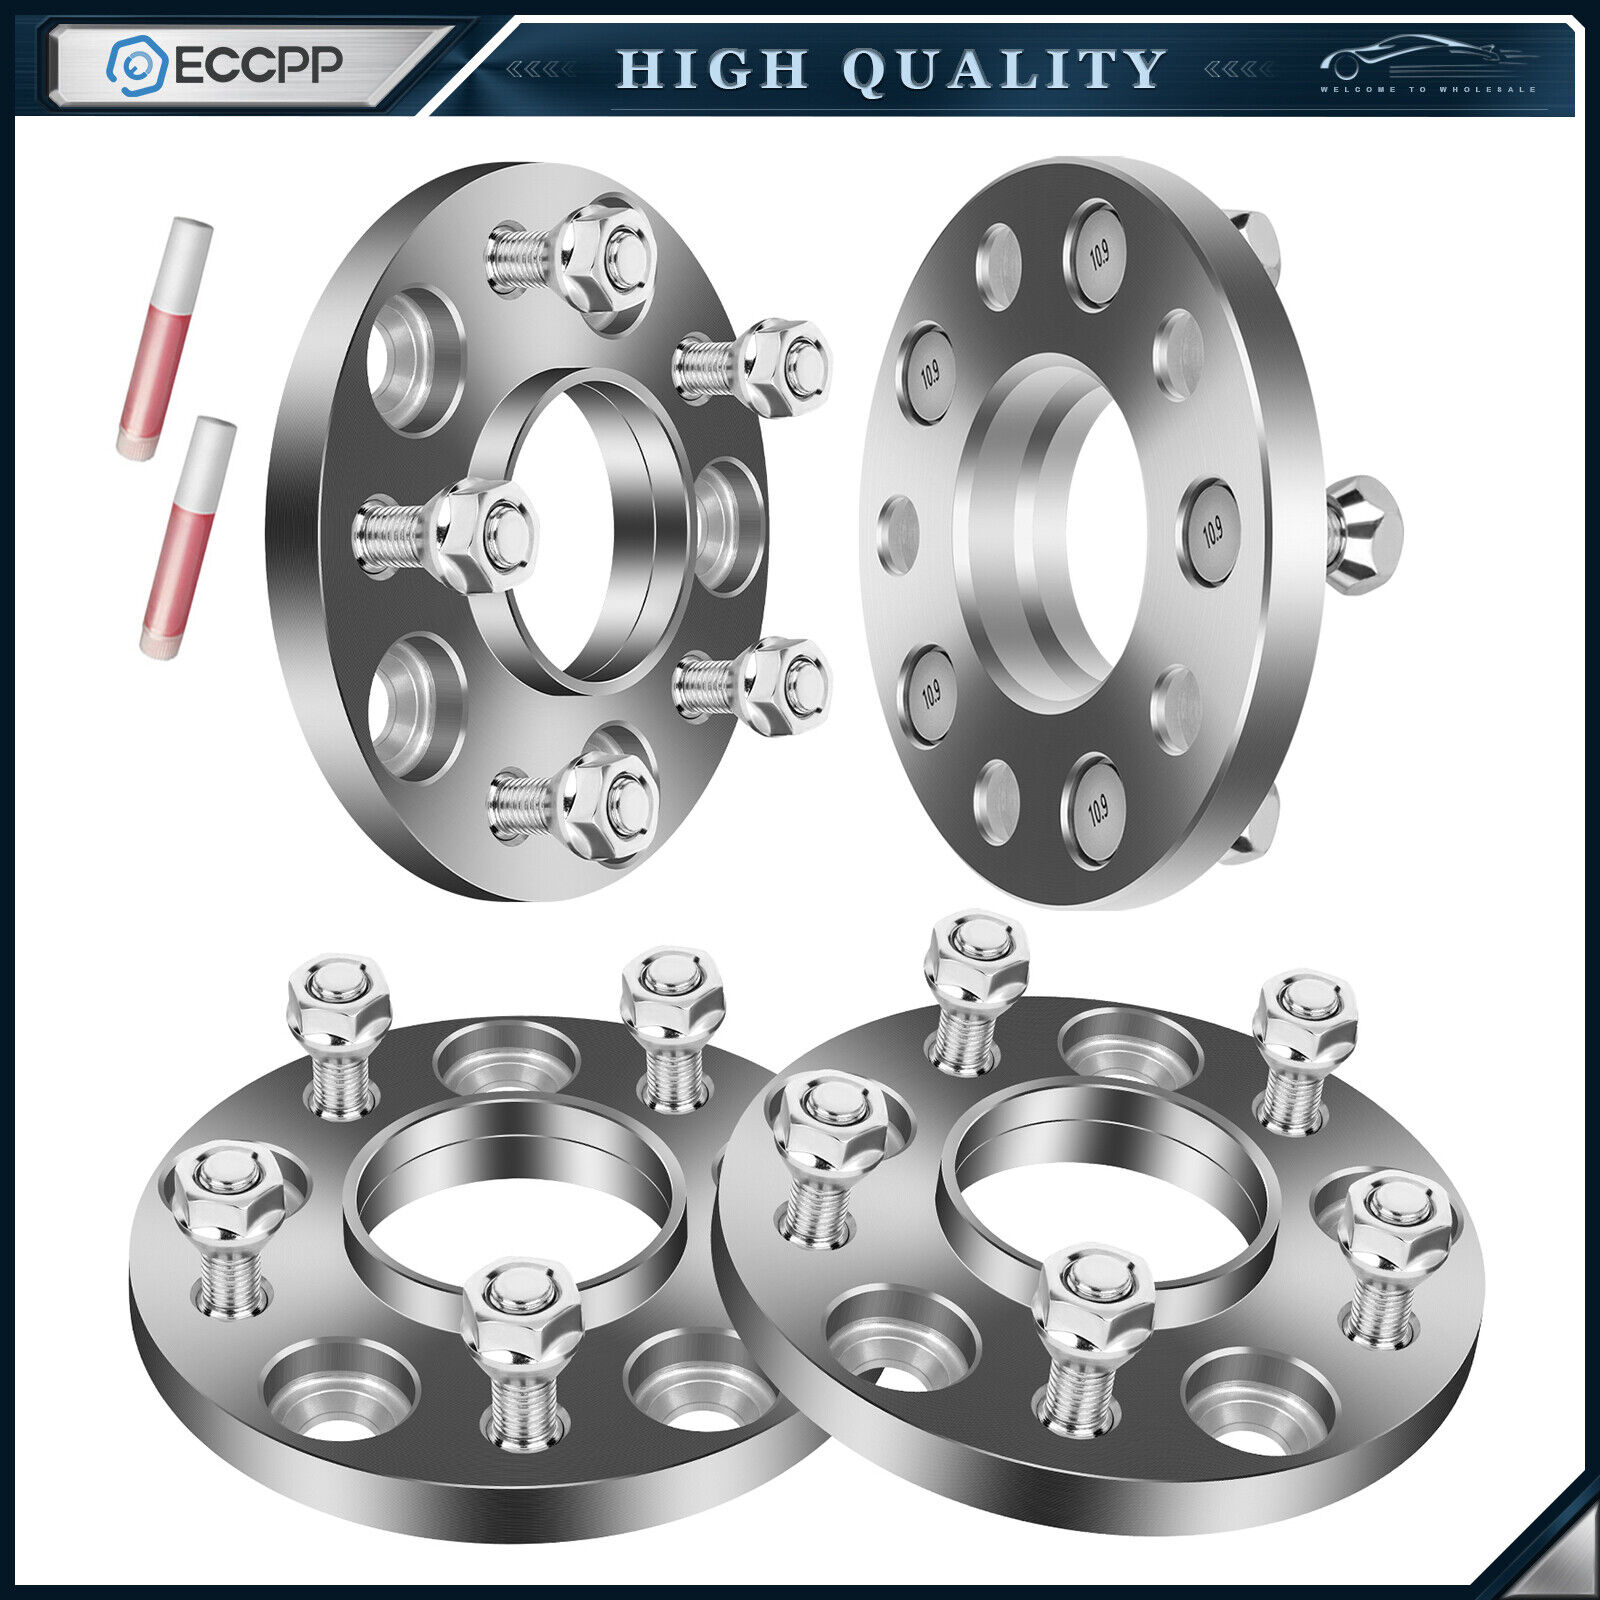 4P 15mm 5x4.5 Hub Centric Wheel Spacers For Nissan 350Z 2003-2009 370Z 2009-2023